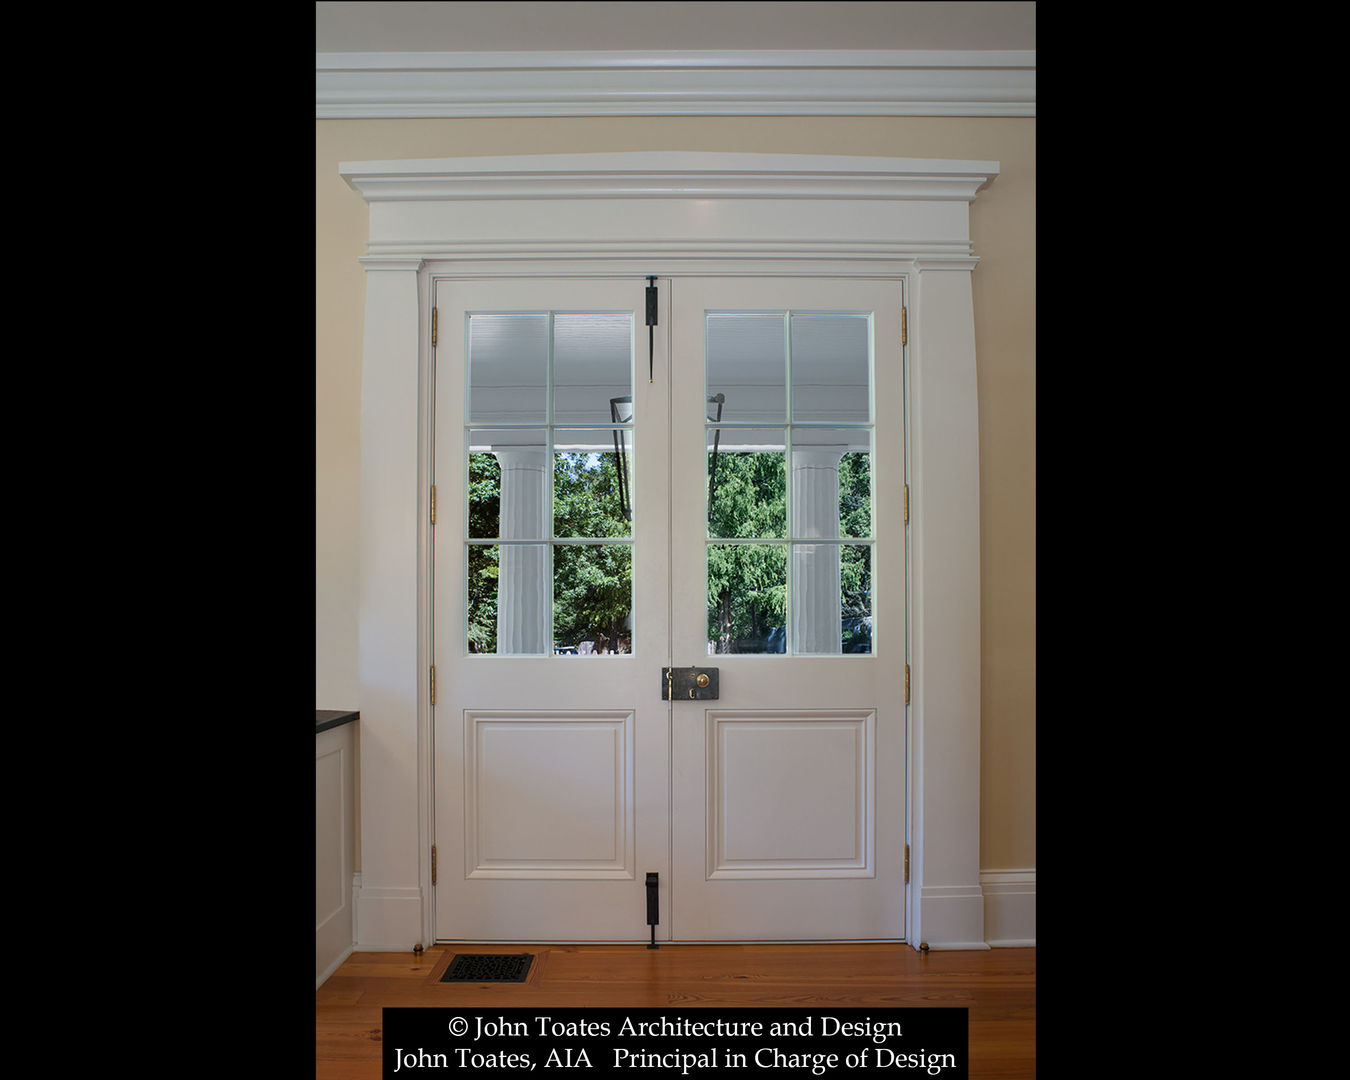 Porch Doors John Toates Architecture and Design Classic style windows & doors